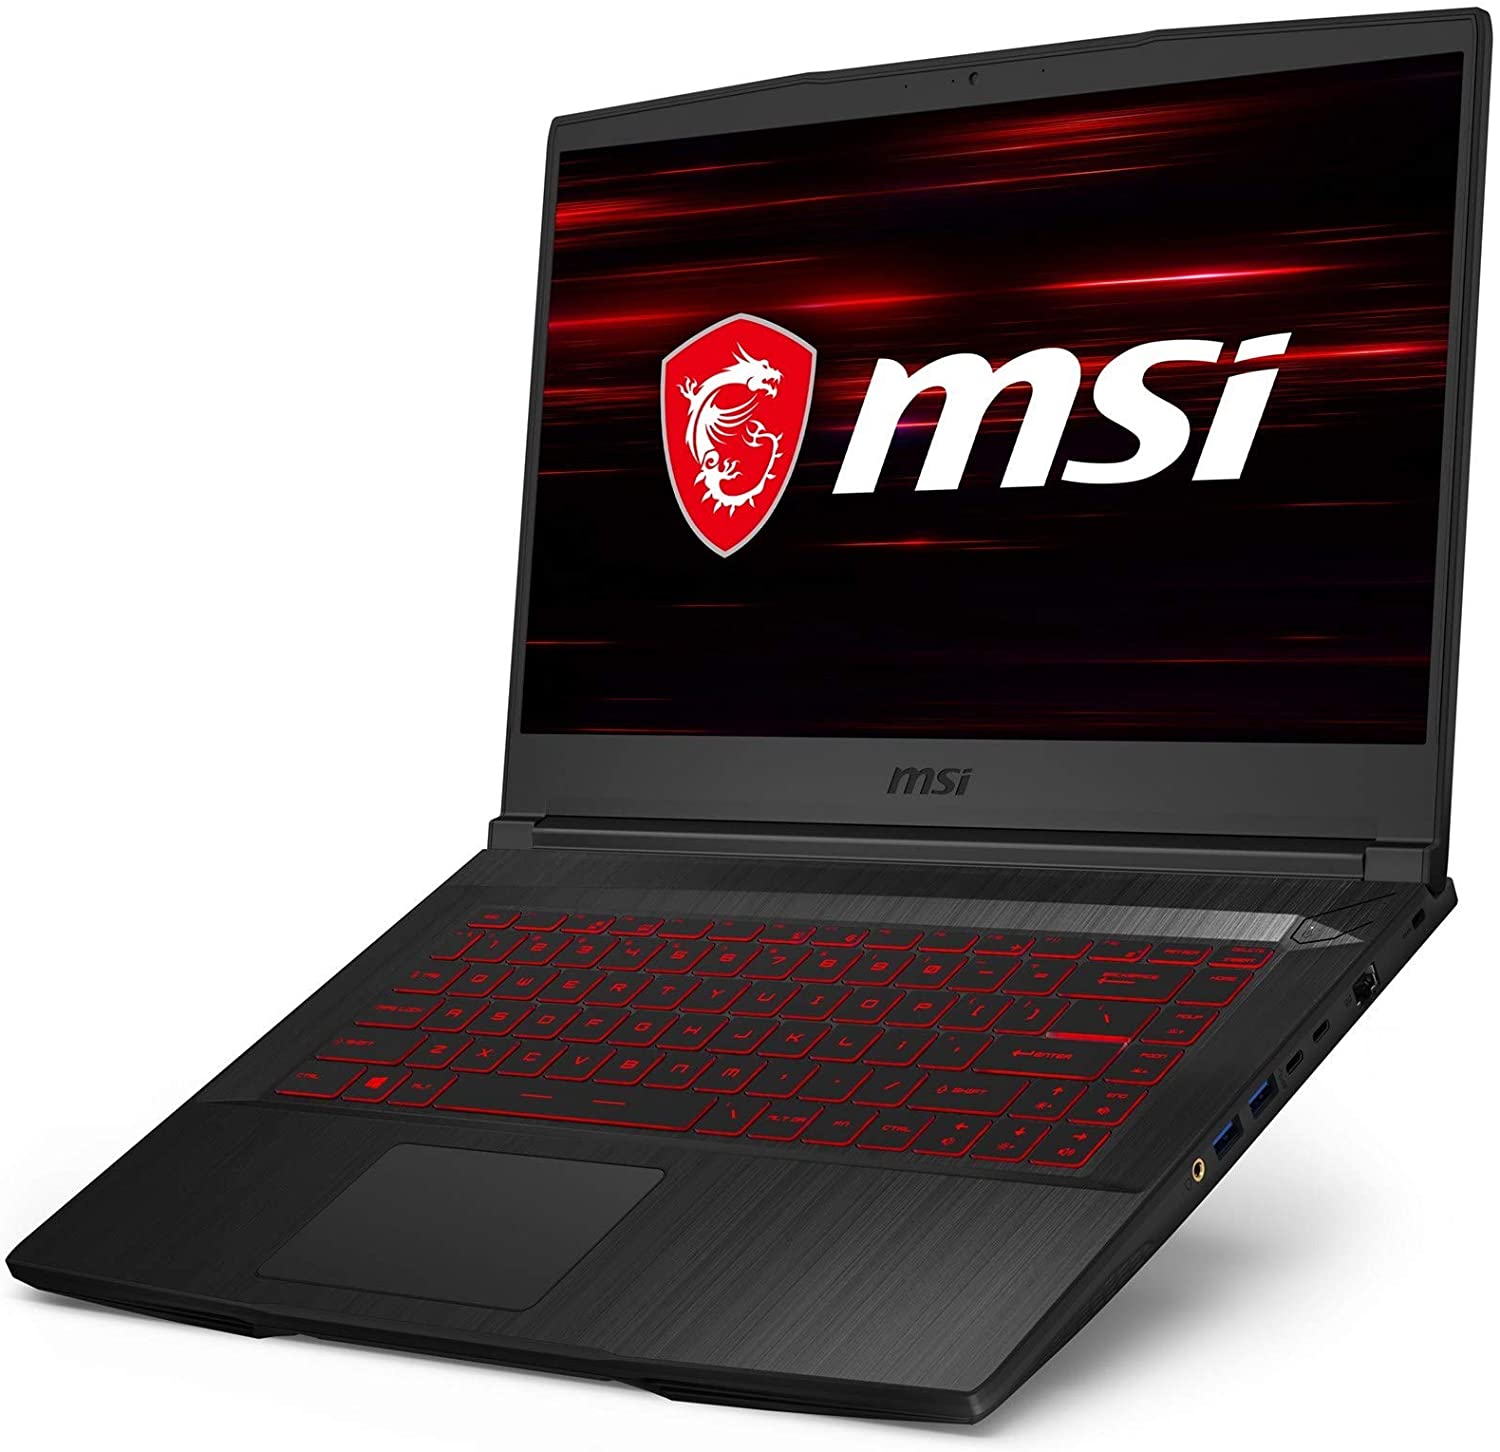 MSI GF65 THIN 9SE 013 15 6 120Hz Gaming Laptop Intel Core i7 9750H RTX2060 16GB 512GB Nvme SSD Win10Home - DealYaSteal